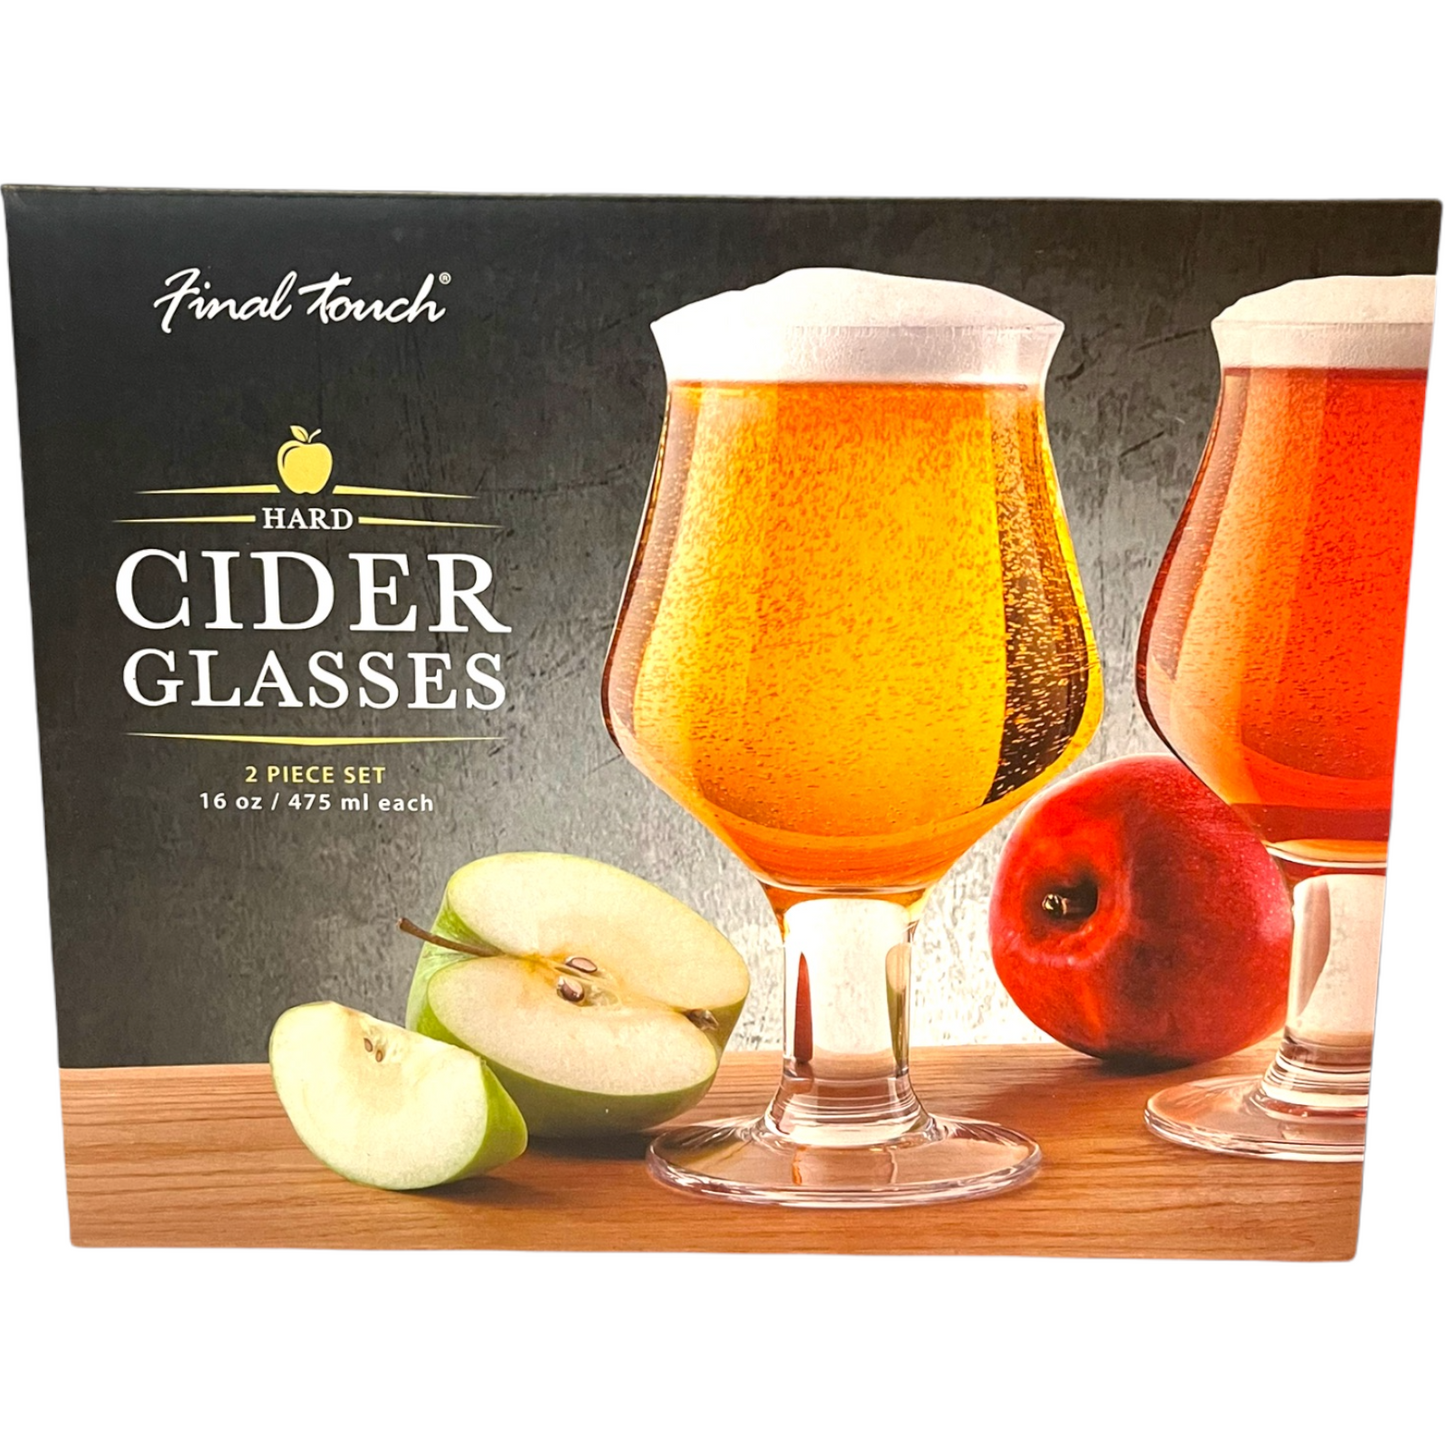 FINAL TOUCH HARD CIDER GLASSES